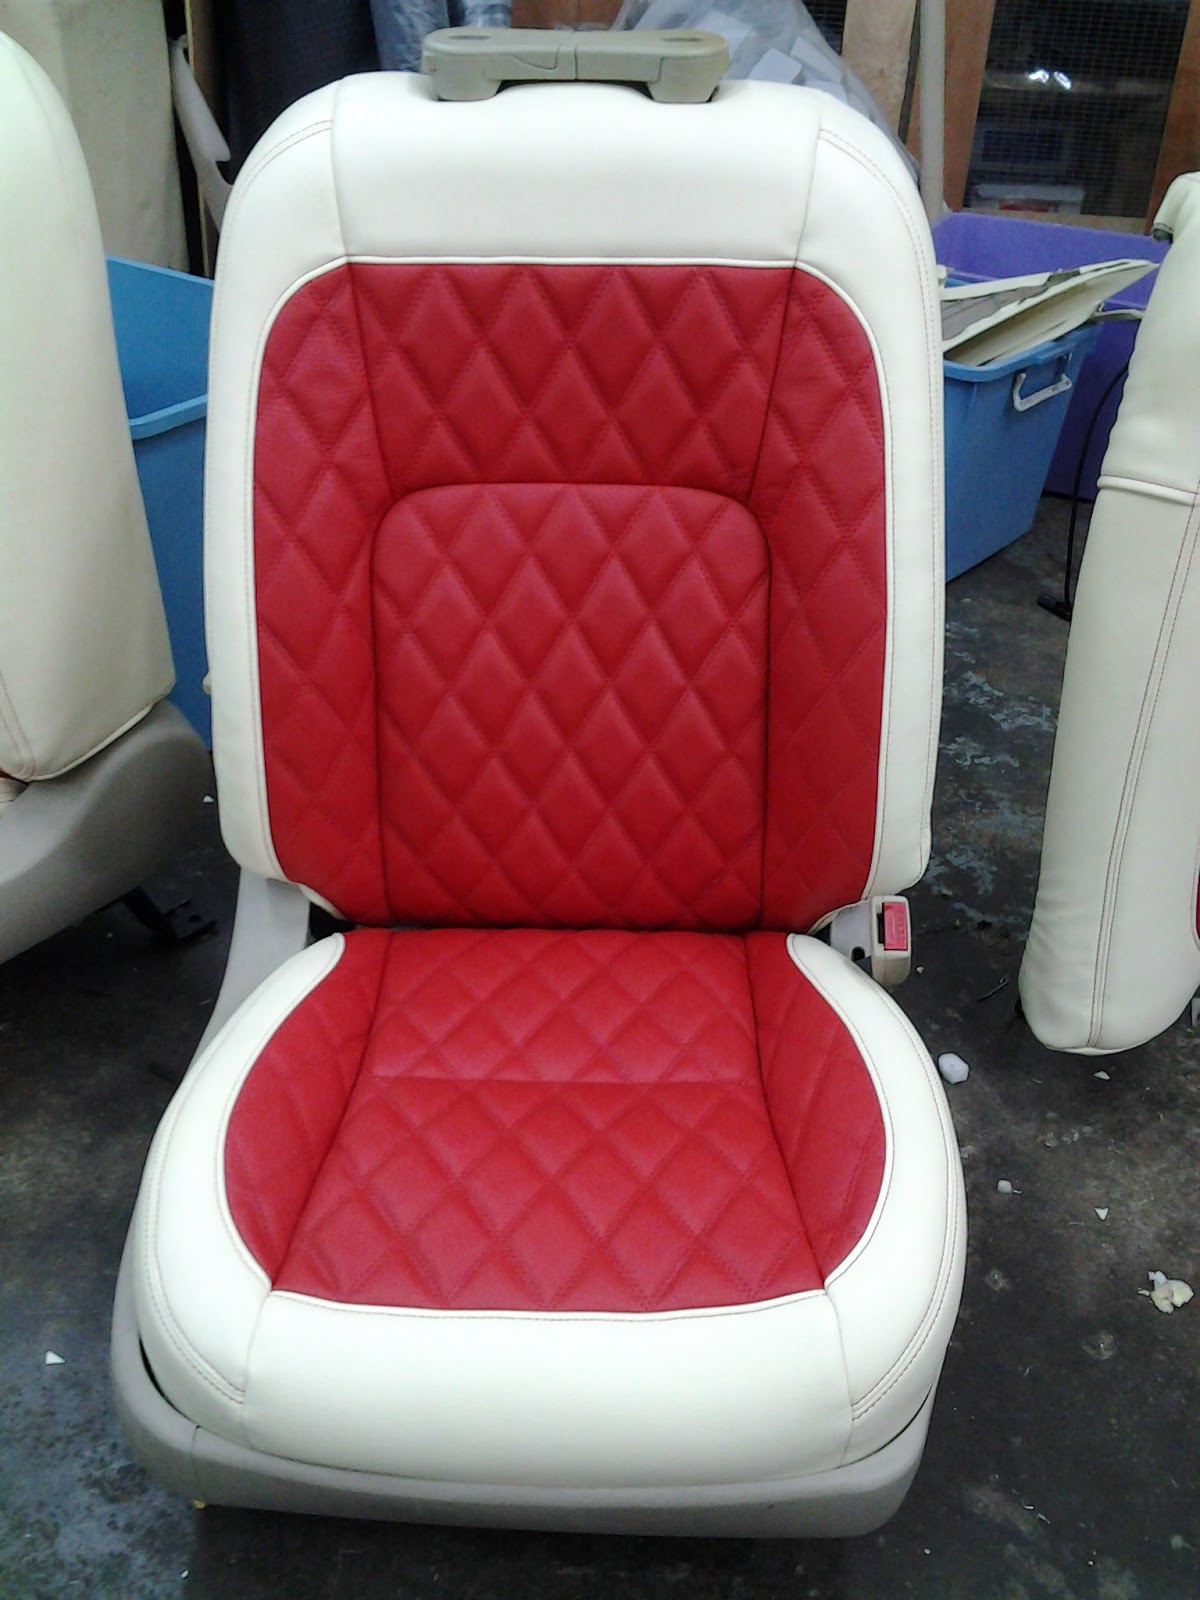 Then Leather Vip Seat Leather Seat Car Interior Design